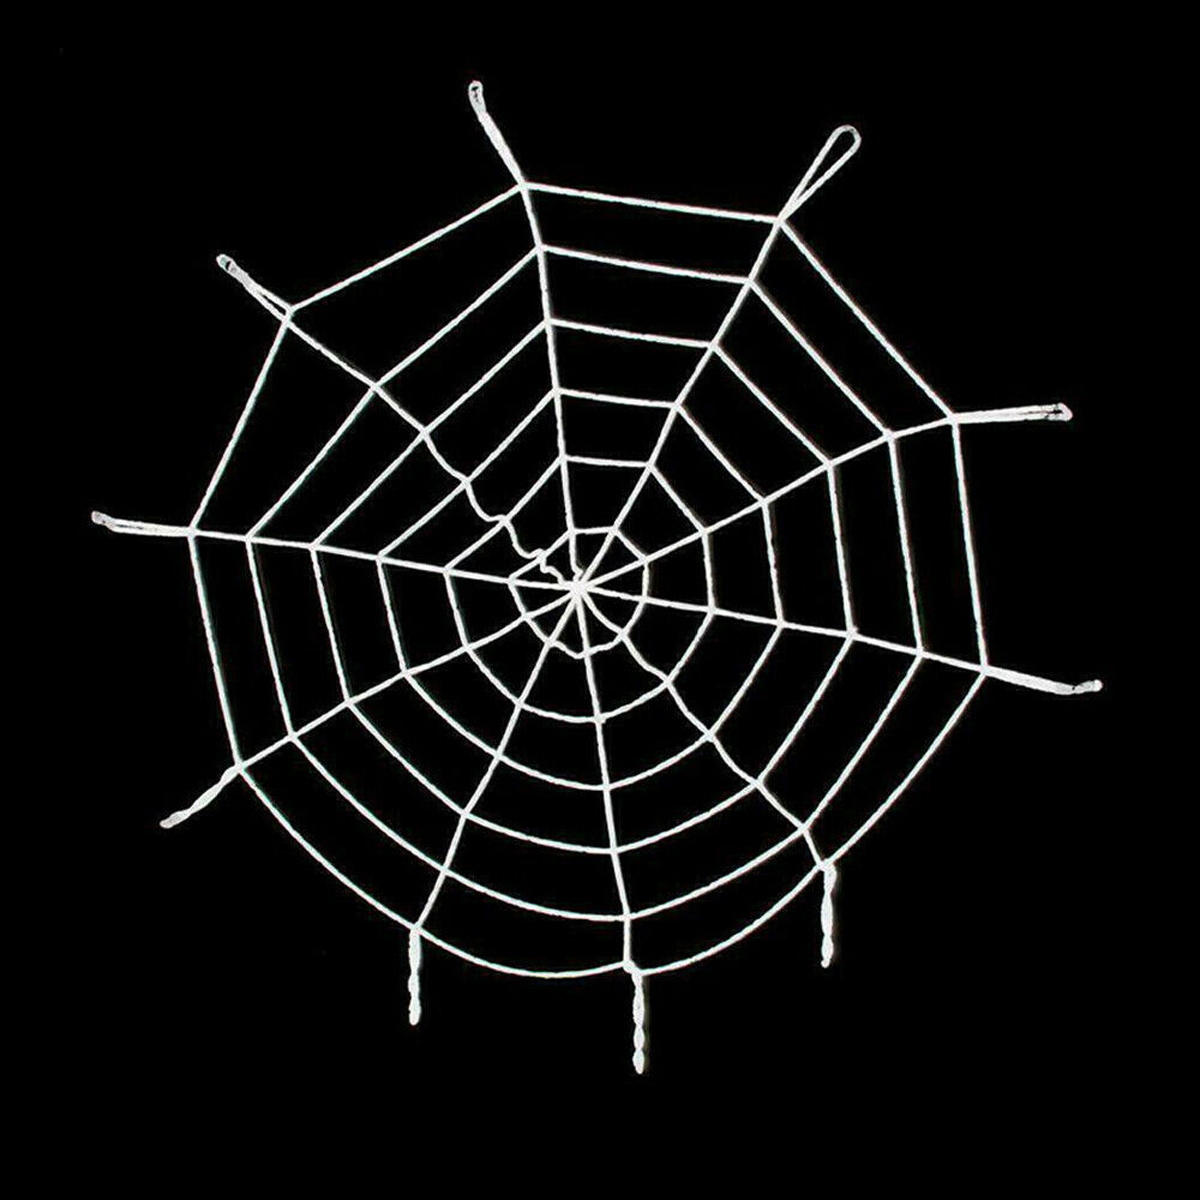 Halloween-LED-Spider-Web-String-Light-Outdoor-Horror-Party-Props-Lamp-Cobweb-Spooky-Decor-1754369-7